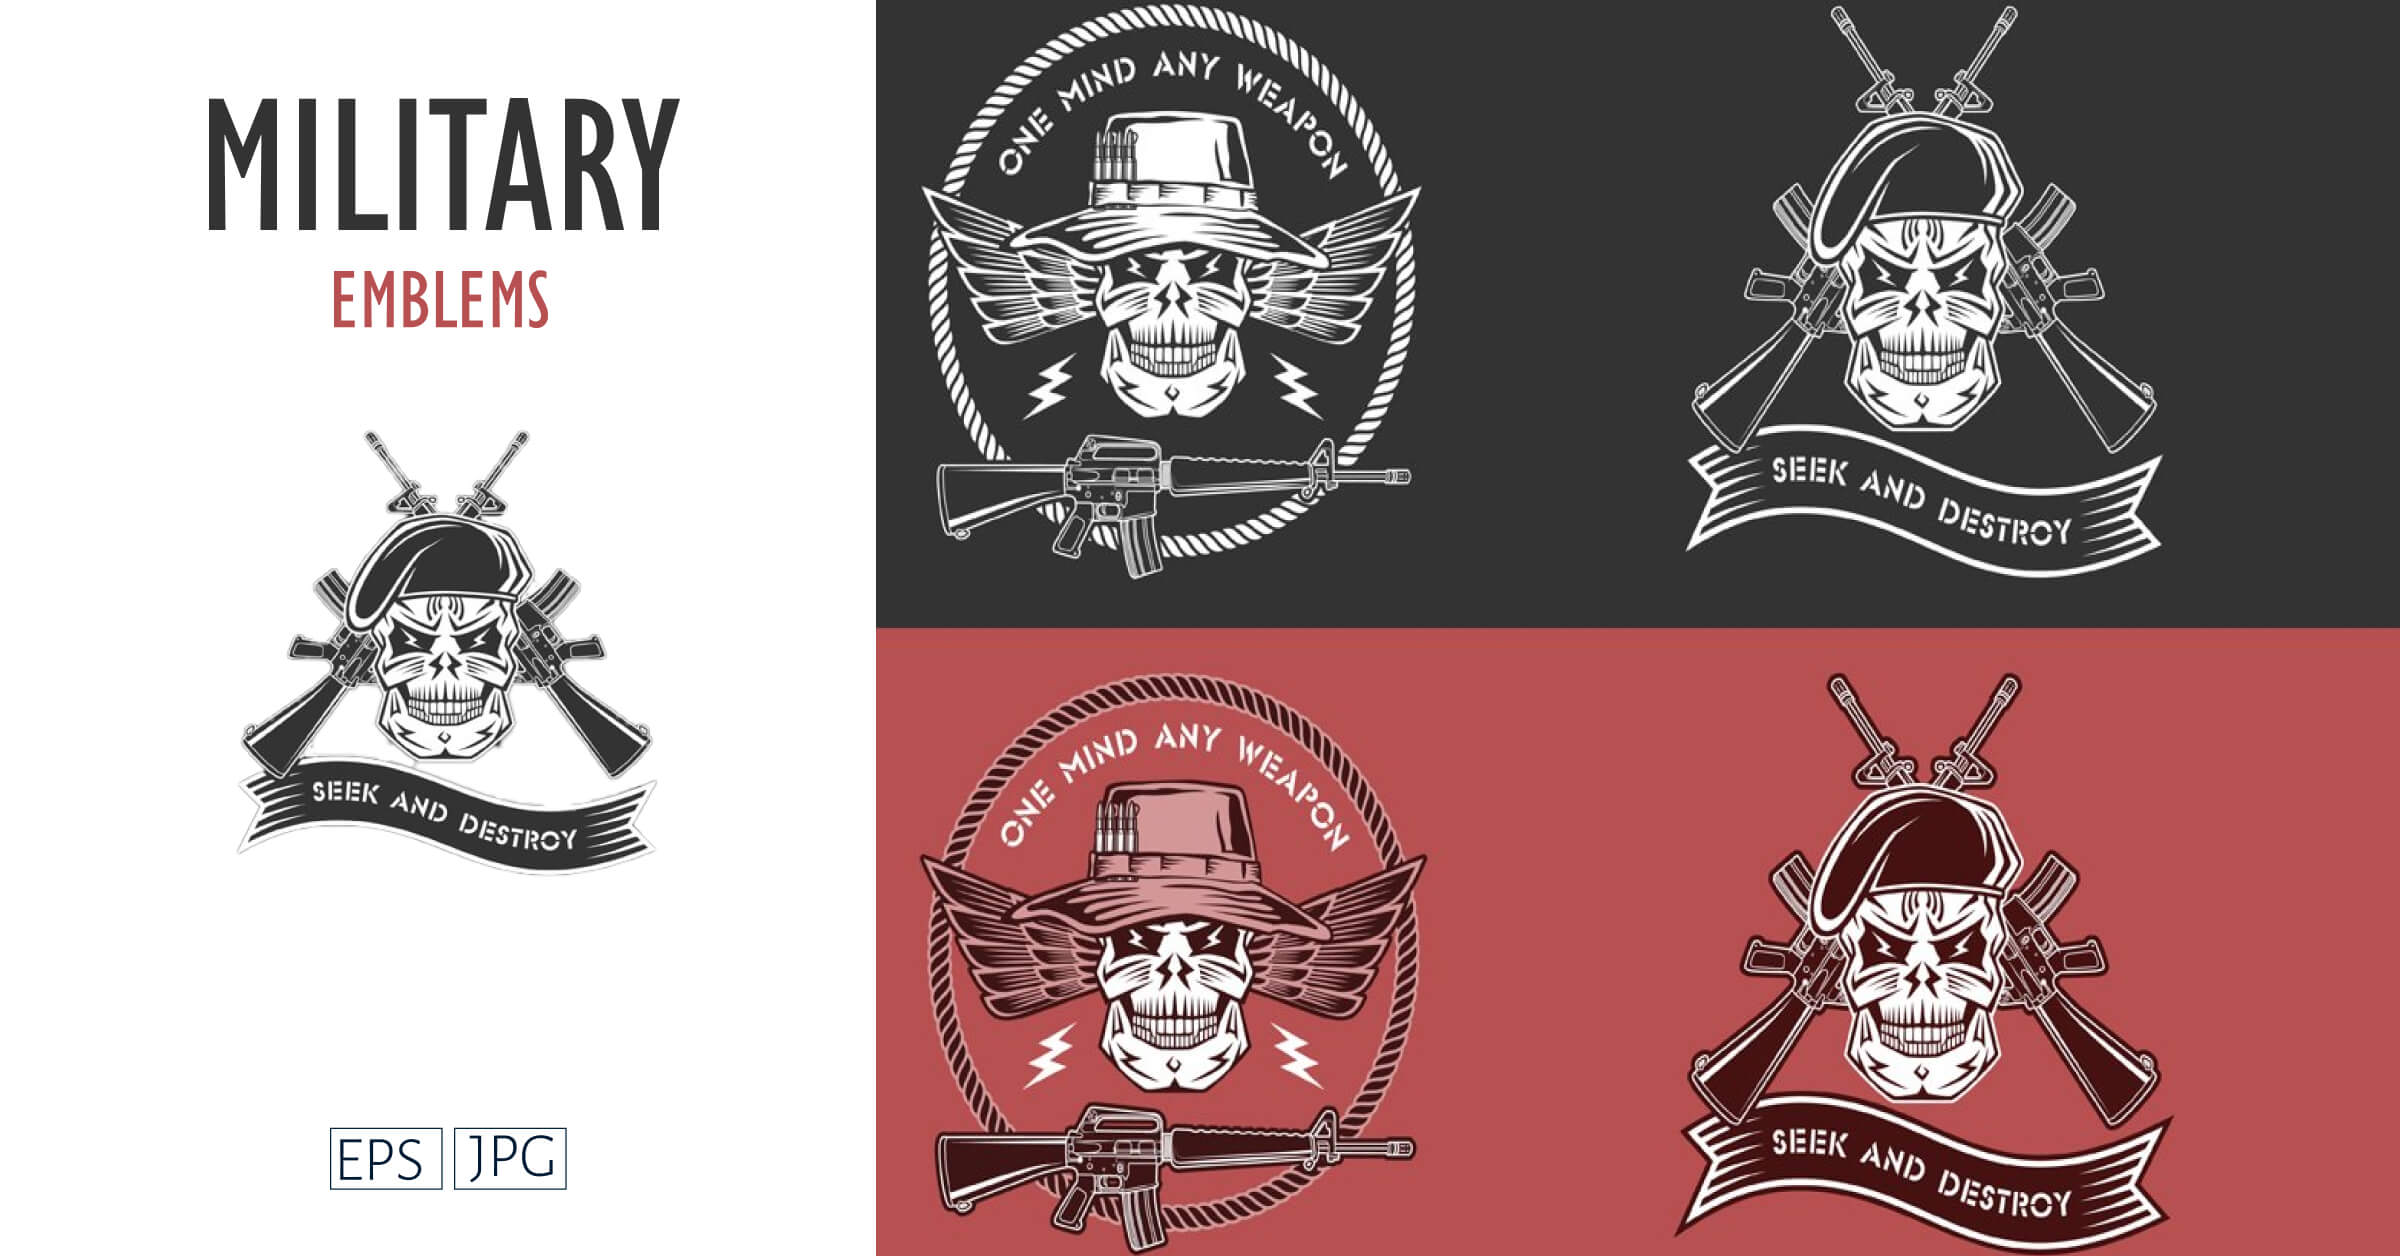 Military emblem with the image of a skull and weapons.